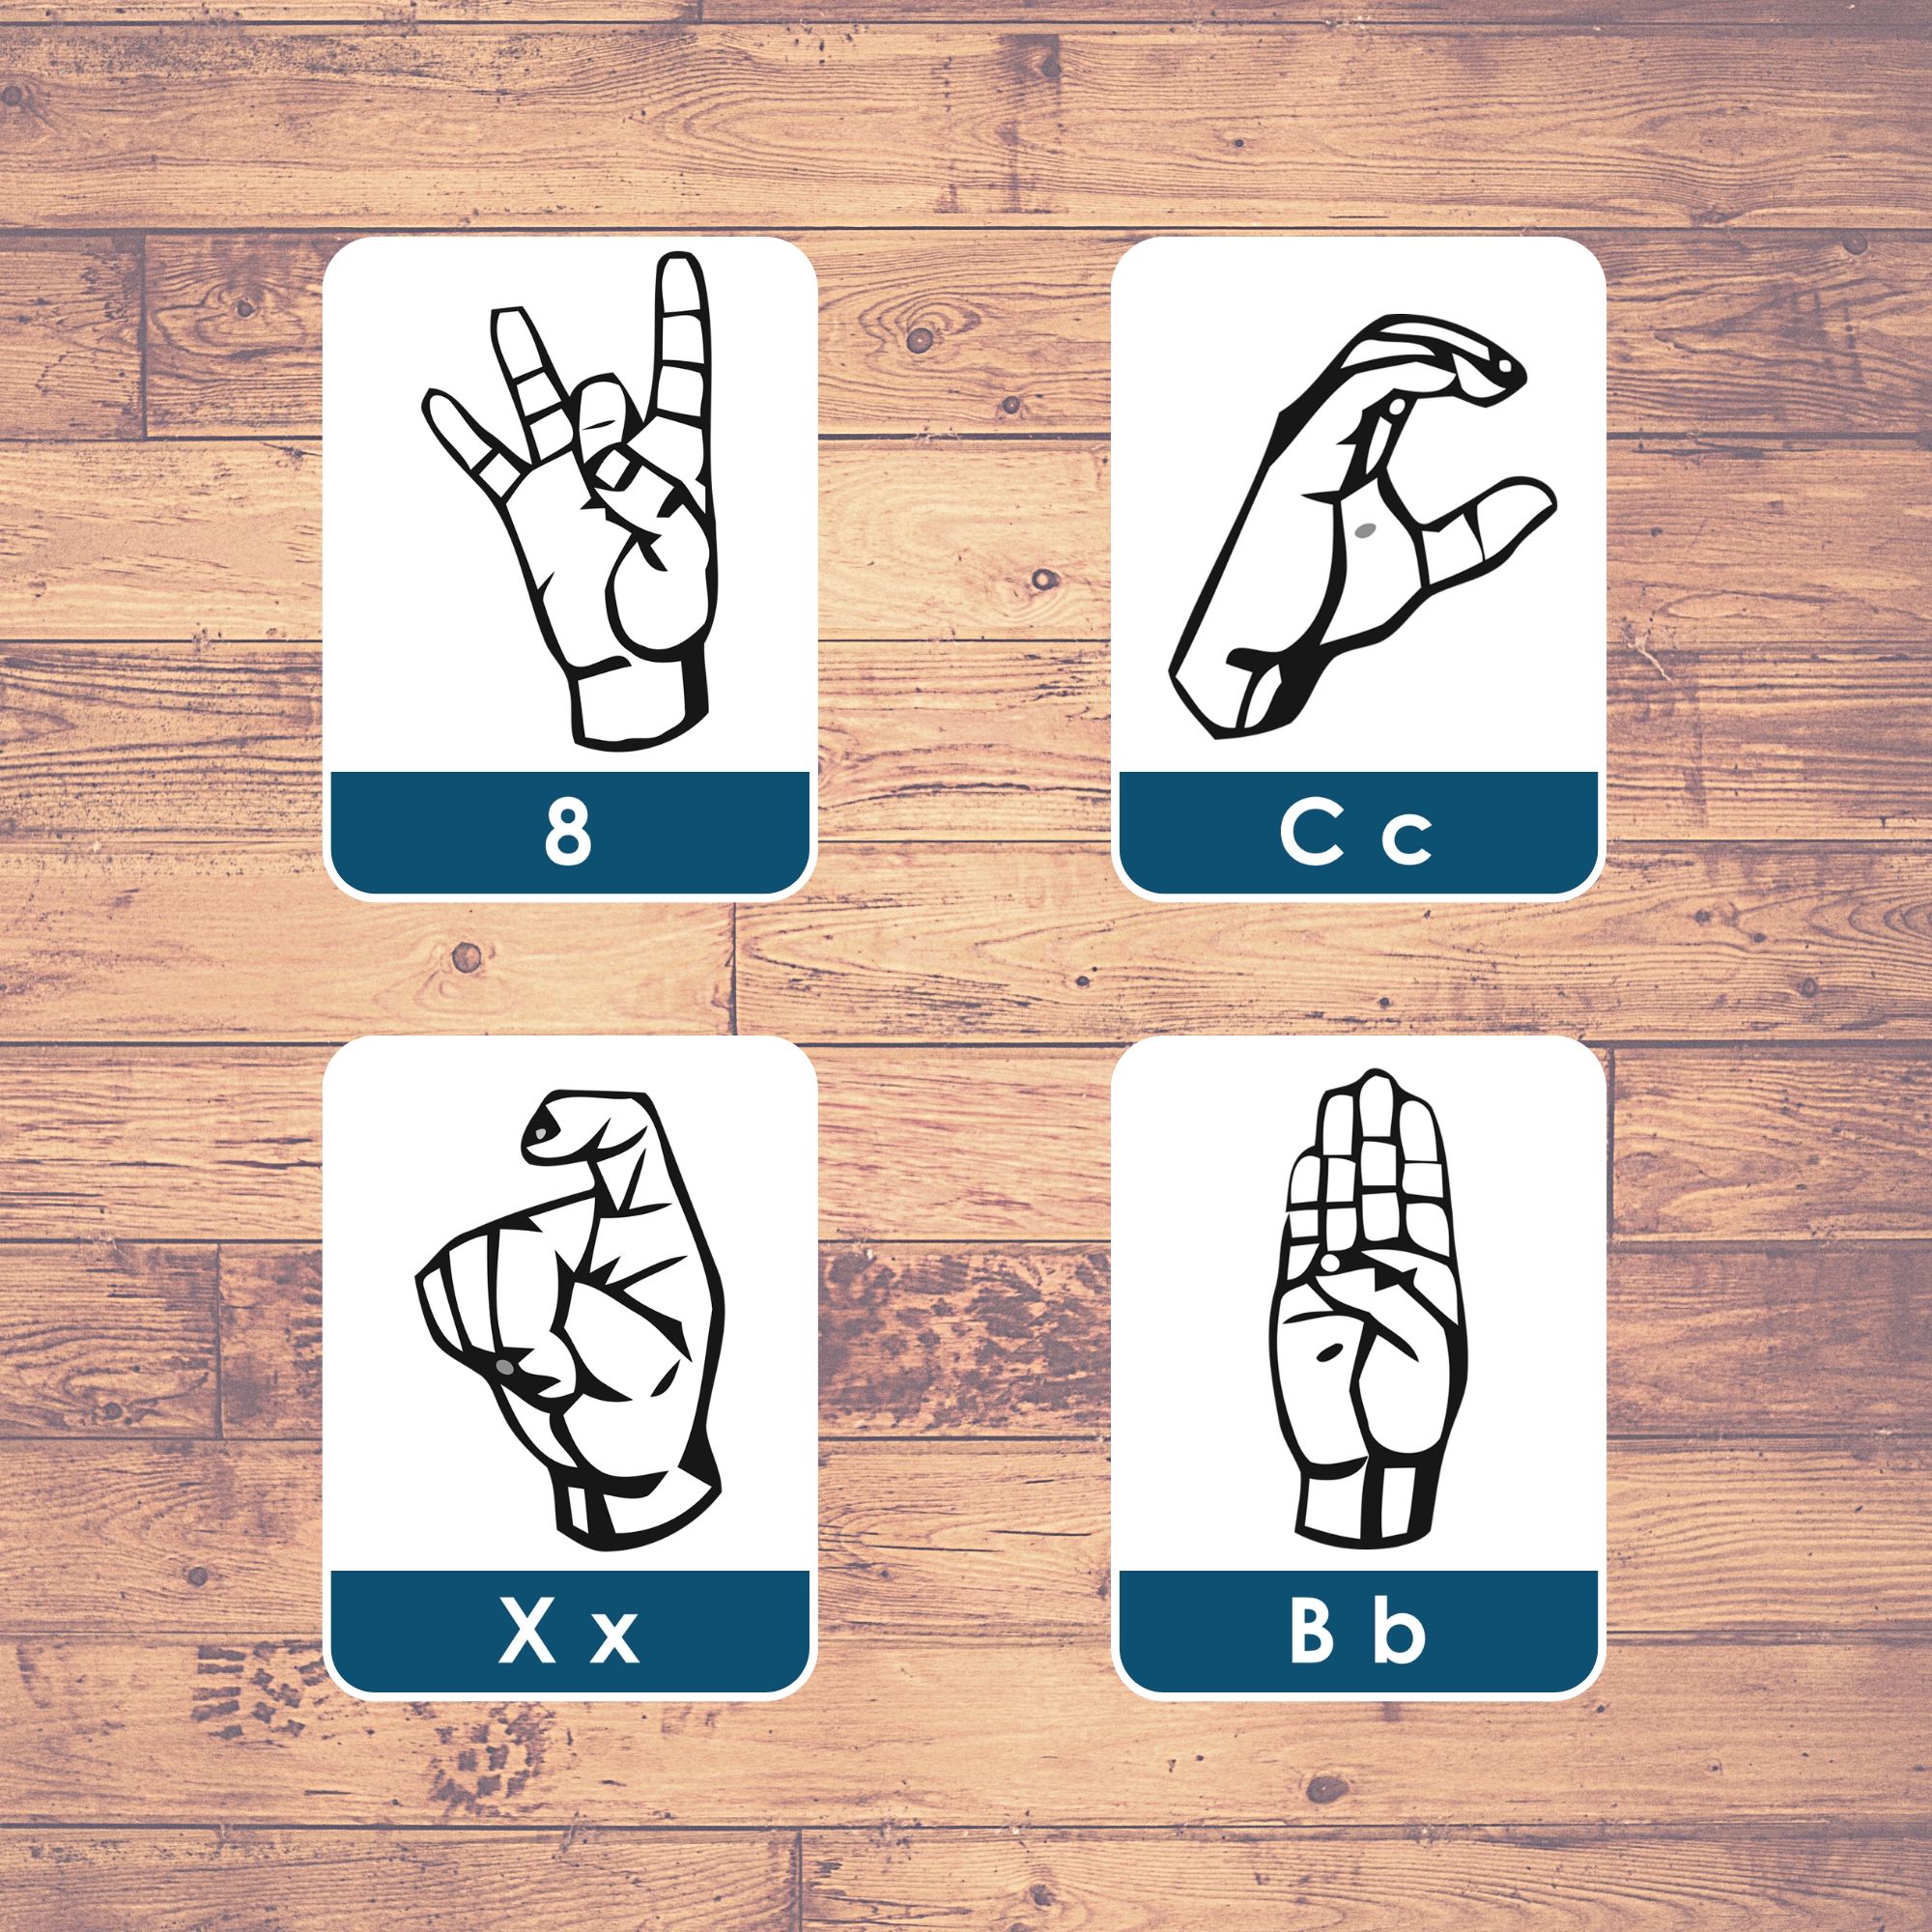 SIGN LANGUAGE Flashcards Educational Three Part Cards Learning